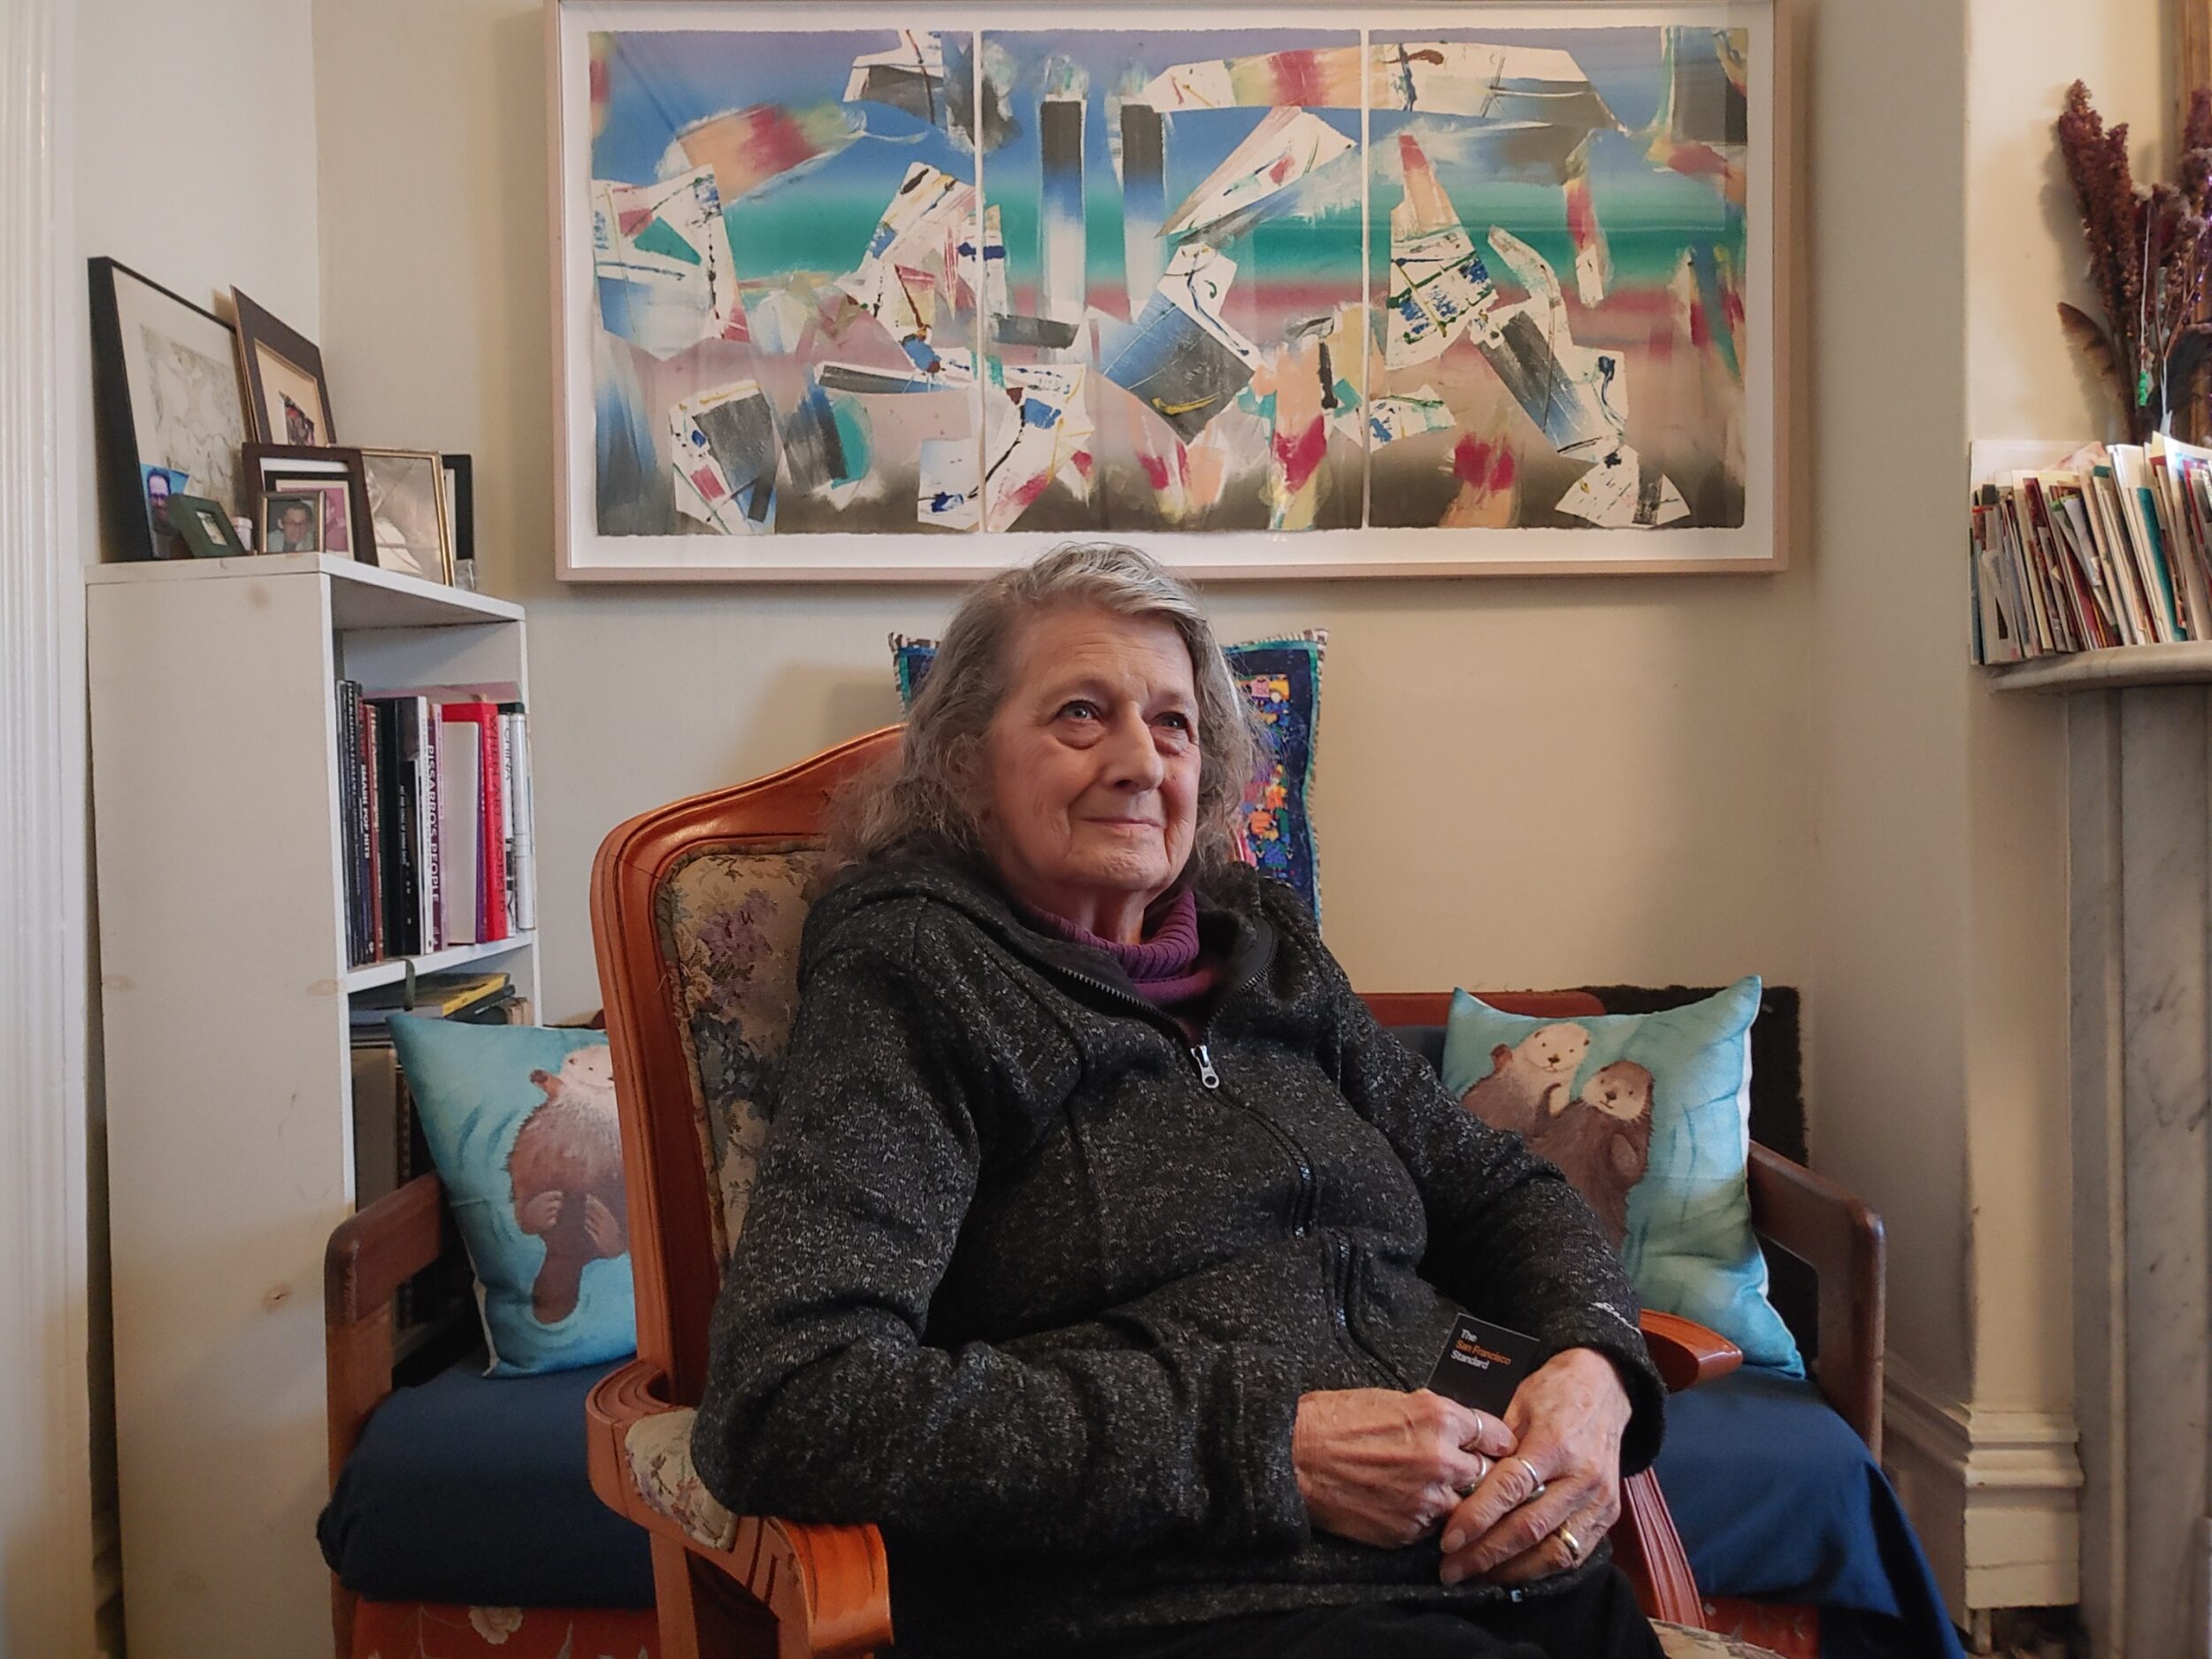 An older woman sits in a vintage chair with an abstract artwork in the background.